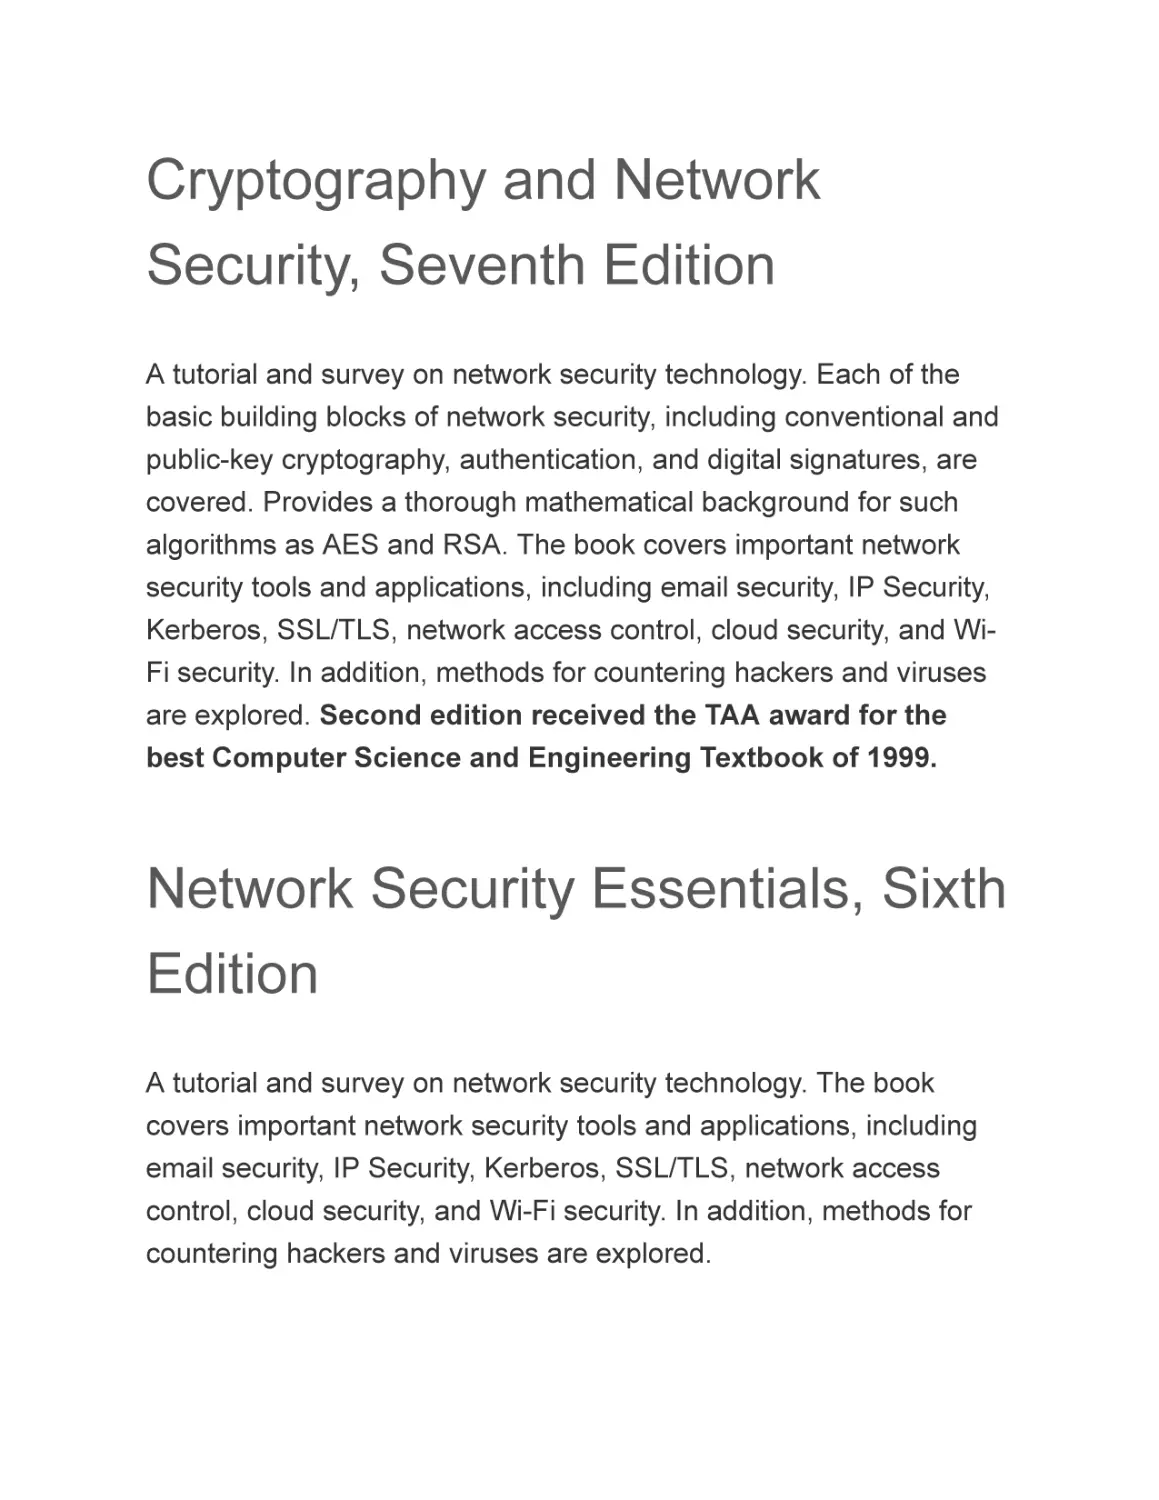 Cryptography and Network Security, Seventh Edition
Network Security Essentials, Sixth Edition